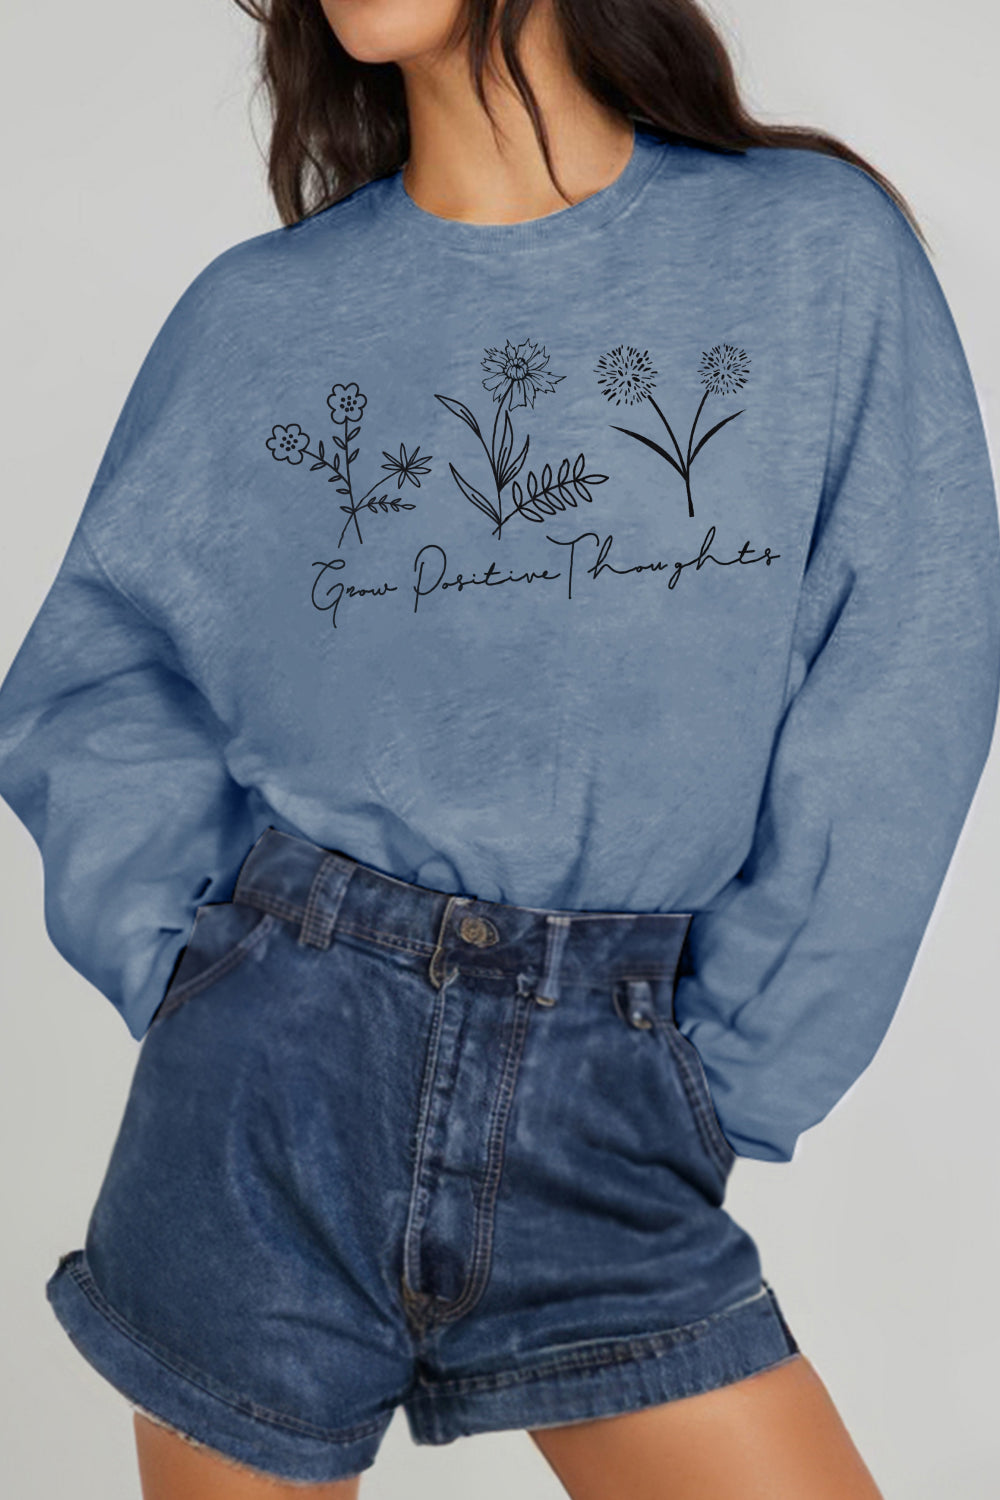 Simply Love Full Size GROW POSITIVE THOUGHTS Graphic Sweatshirt